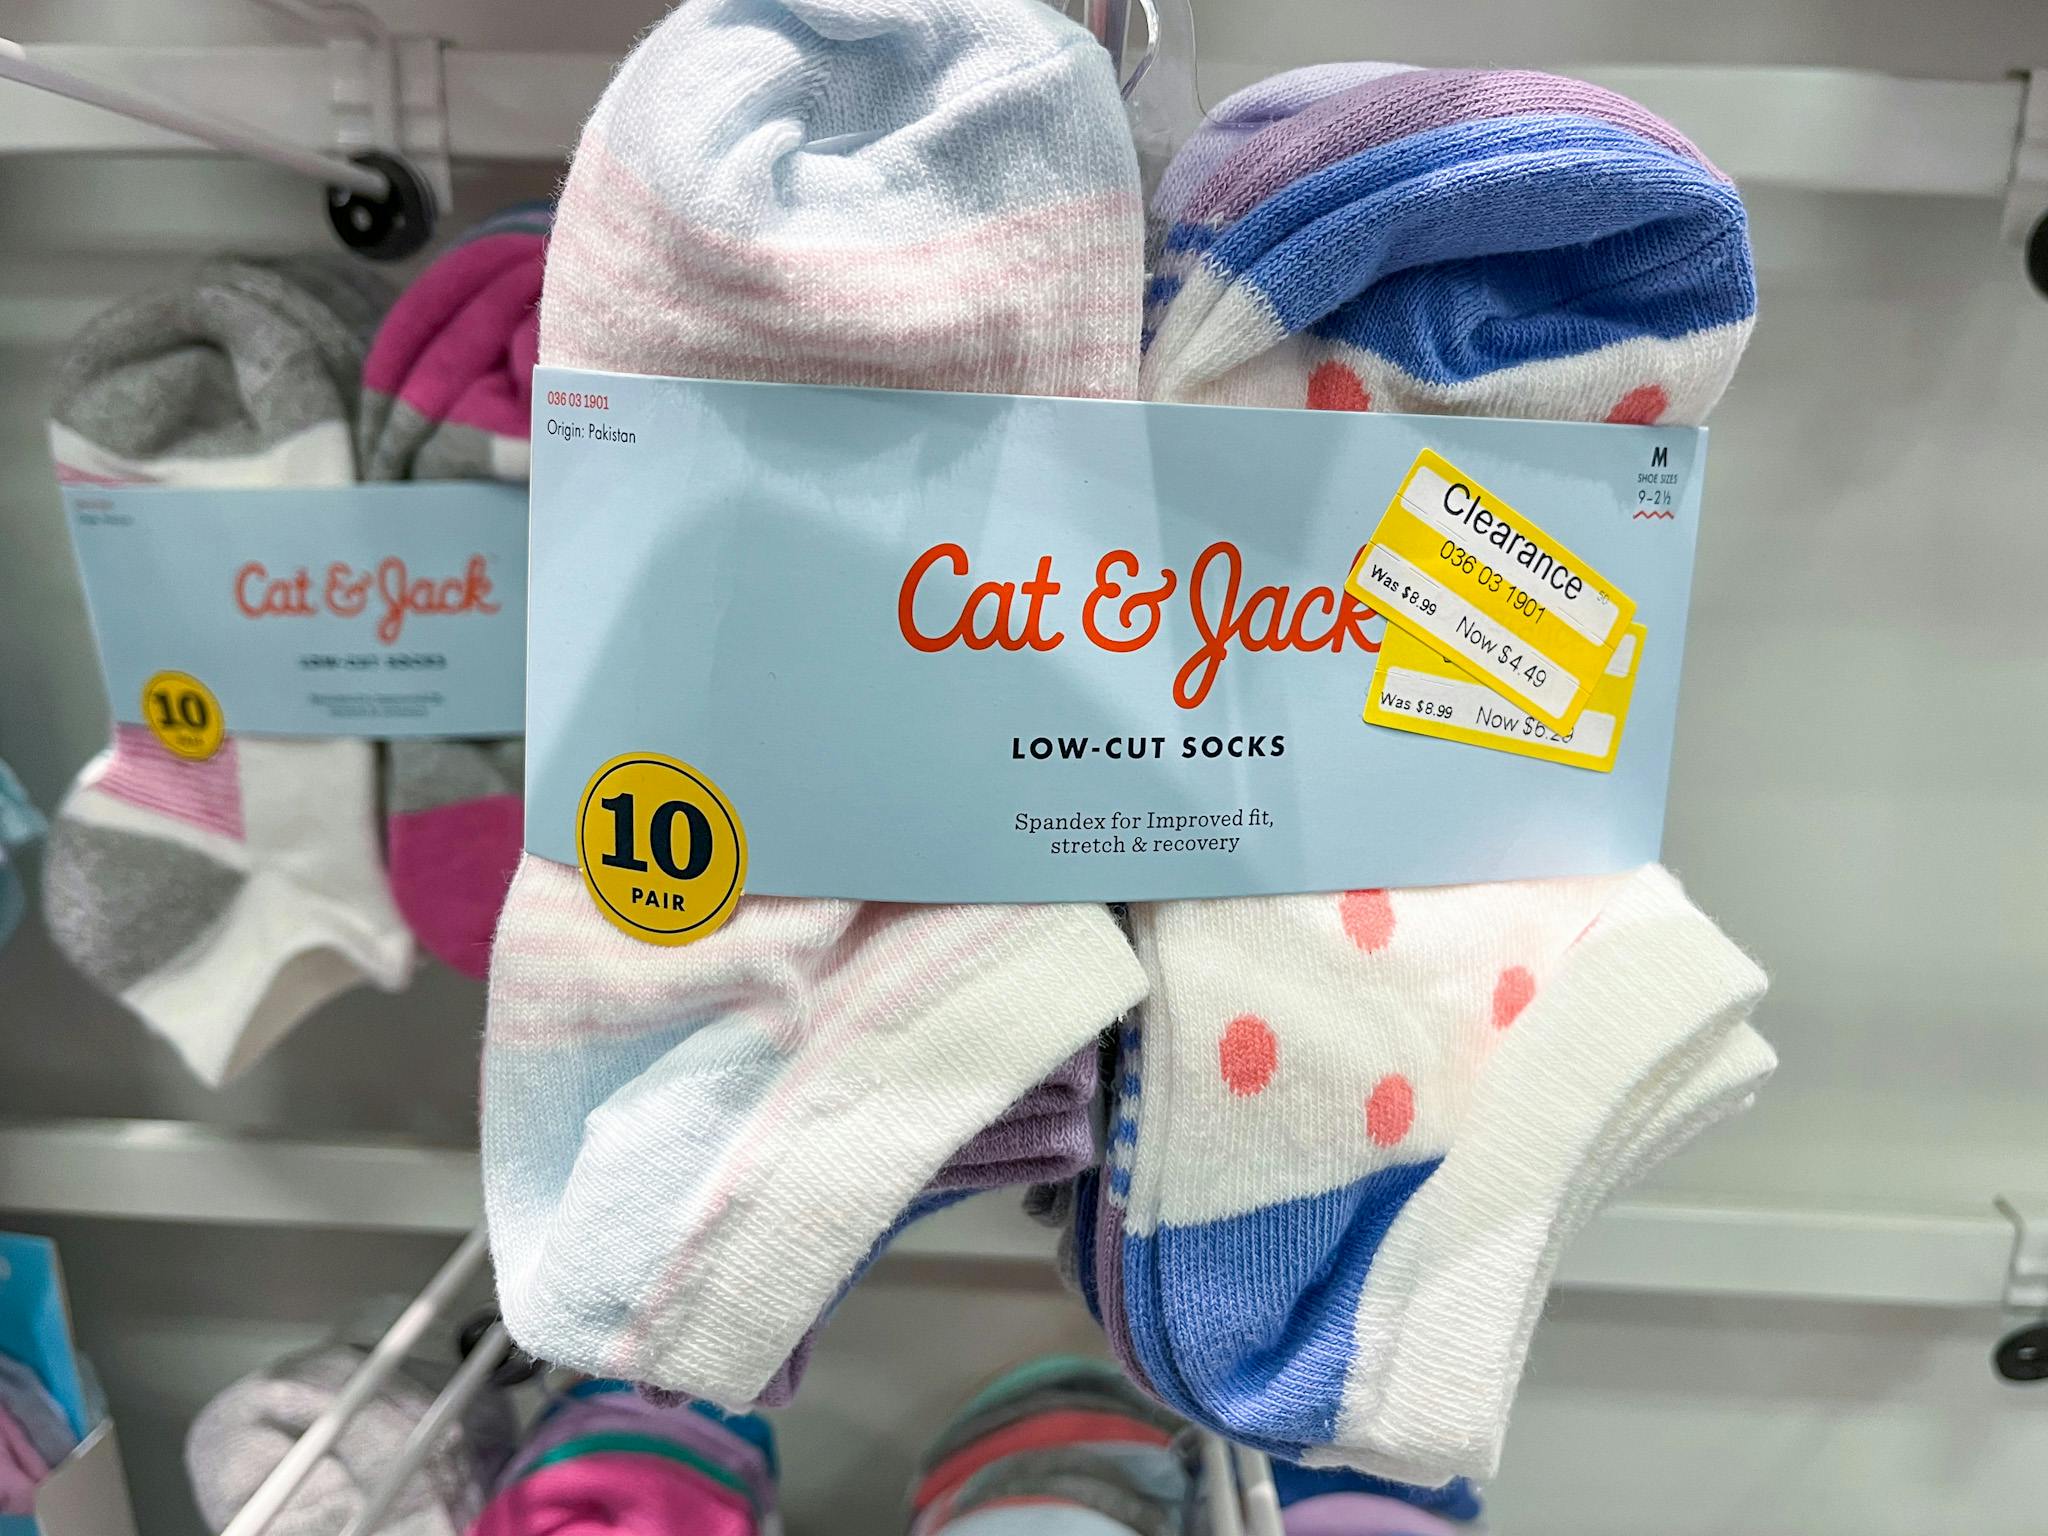 Kids' Socks and Underwear Clearance, 50% Off at Target ($4 10